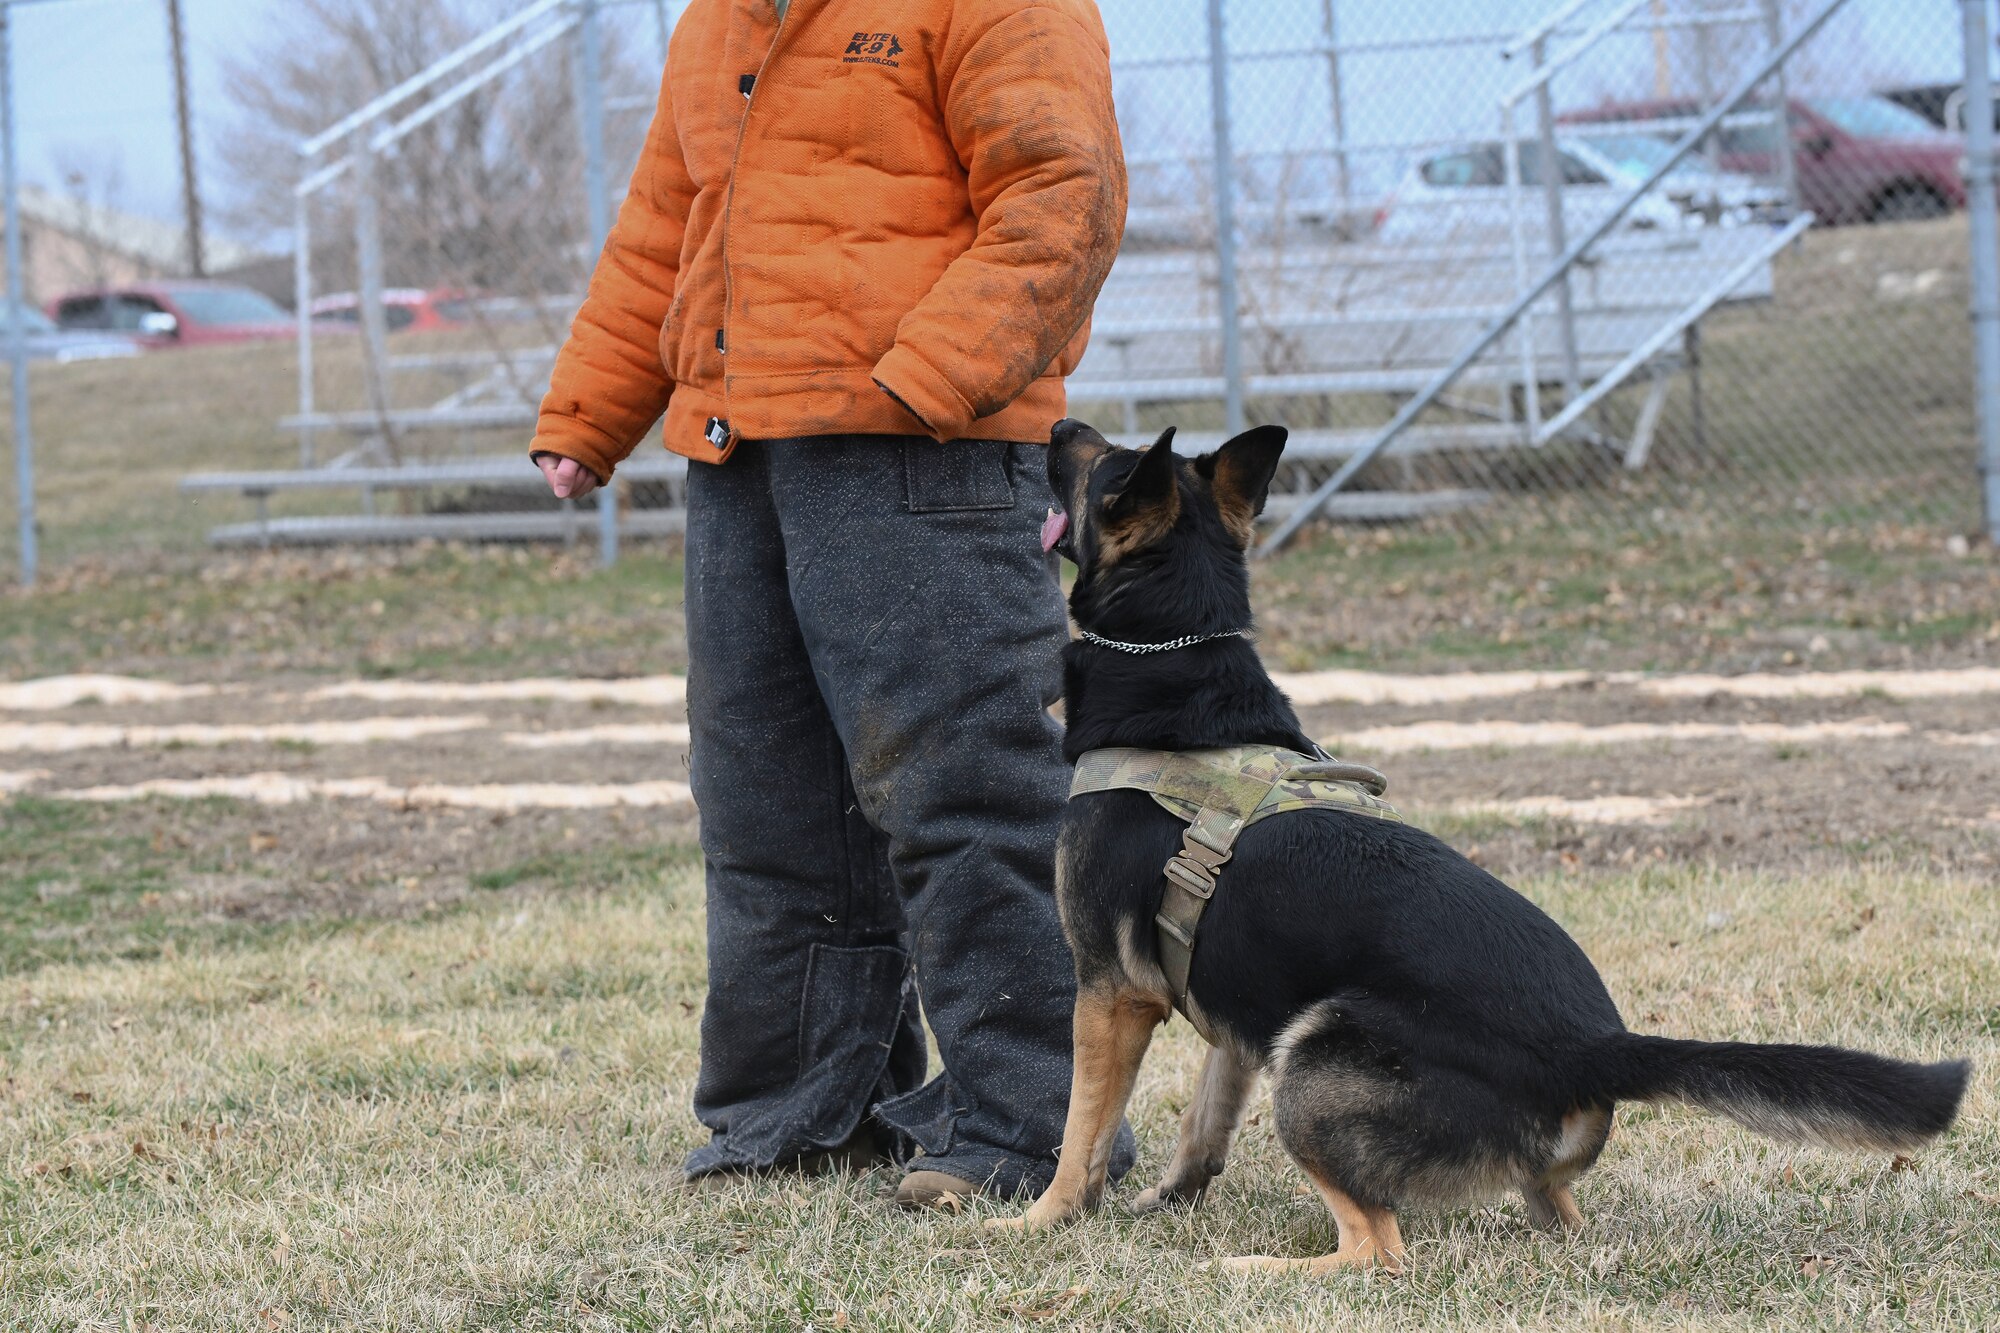 A German Shepard military working dog sits next to a person wearing a bite suit during a demonstration